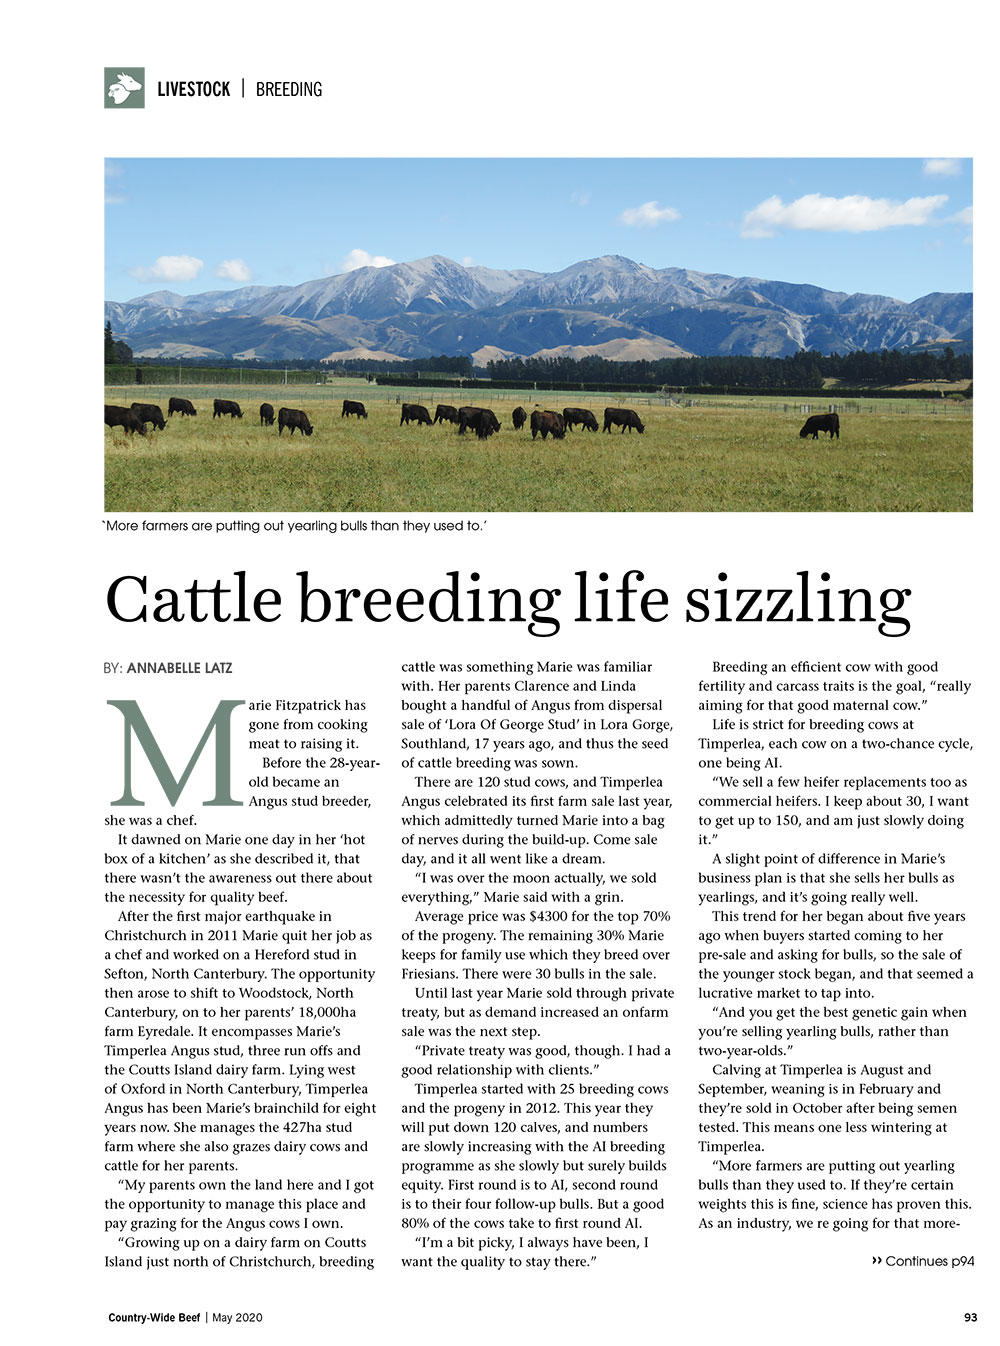 Cattle breeding life sizzling | With Belles On